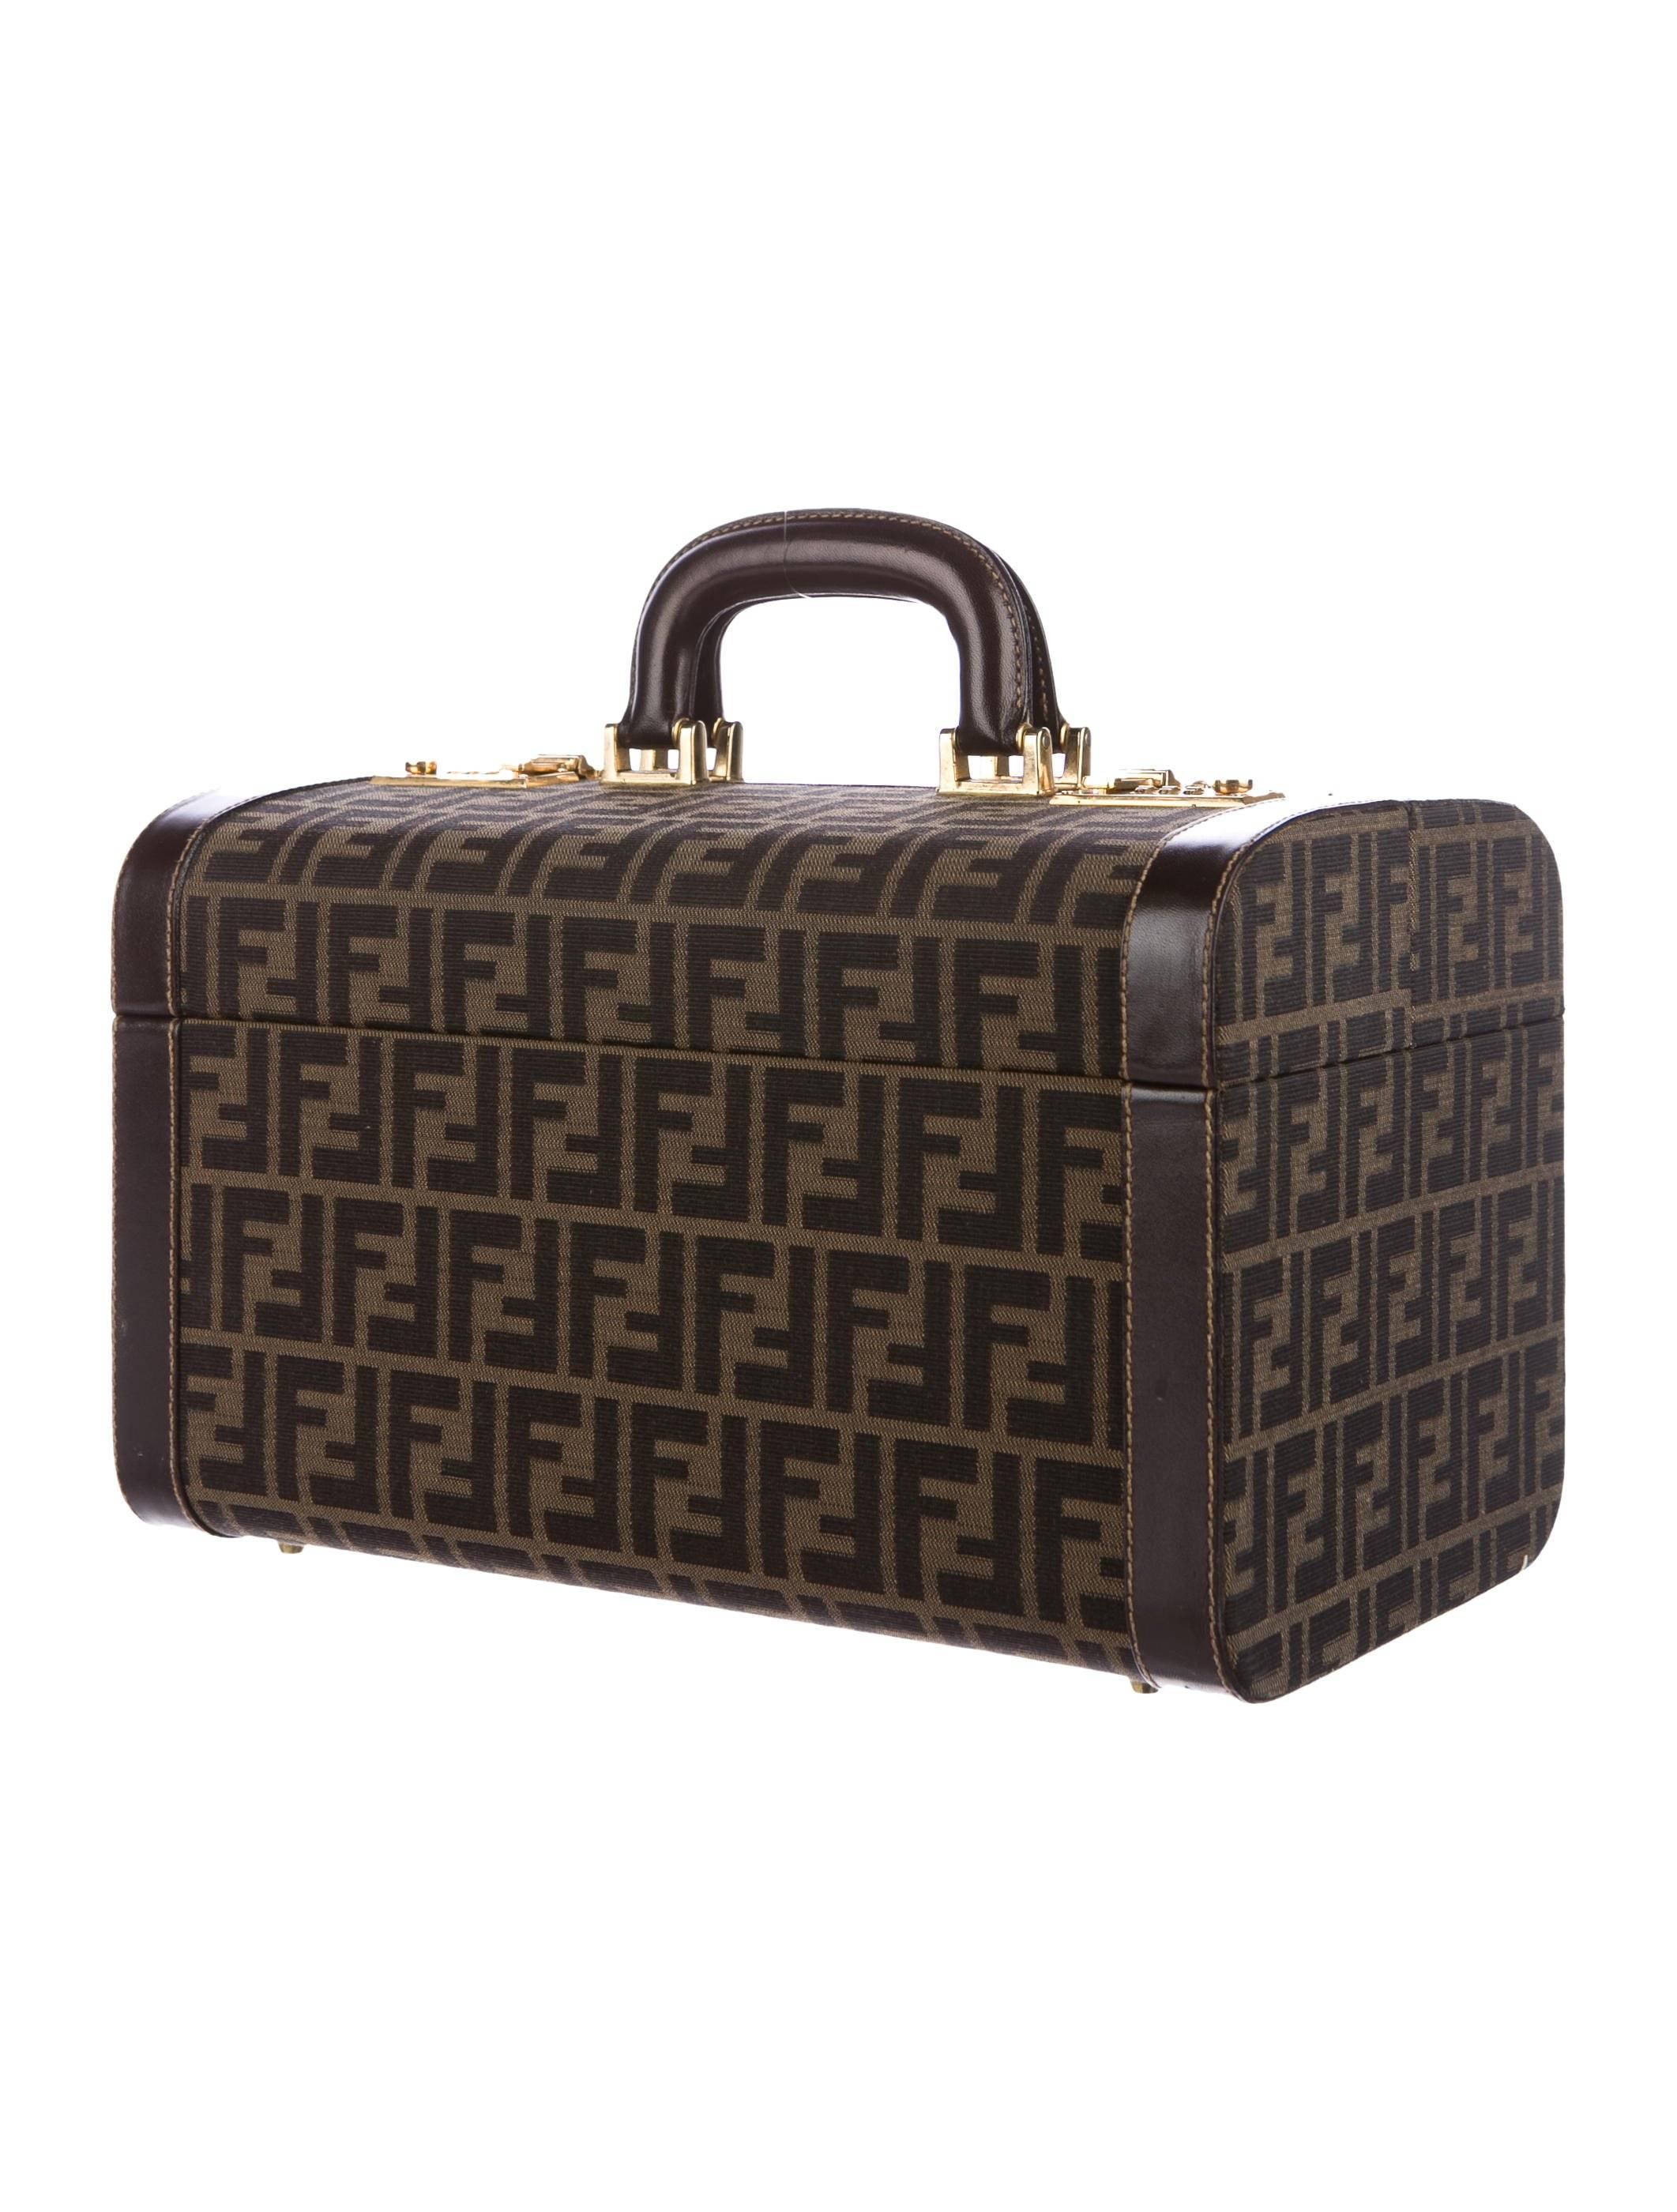 CURATOR'S NOTES

Fendi Monogram Canvas Travel Storage Vanity Jewelry Top Handle Satchel Bag

Monogram canvas
Leather
Gold tone hardware
Flip lock closure (Code 195)
Jacquard lining
Features removable partition and nine leather strap cosmetic